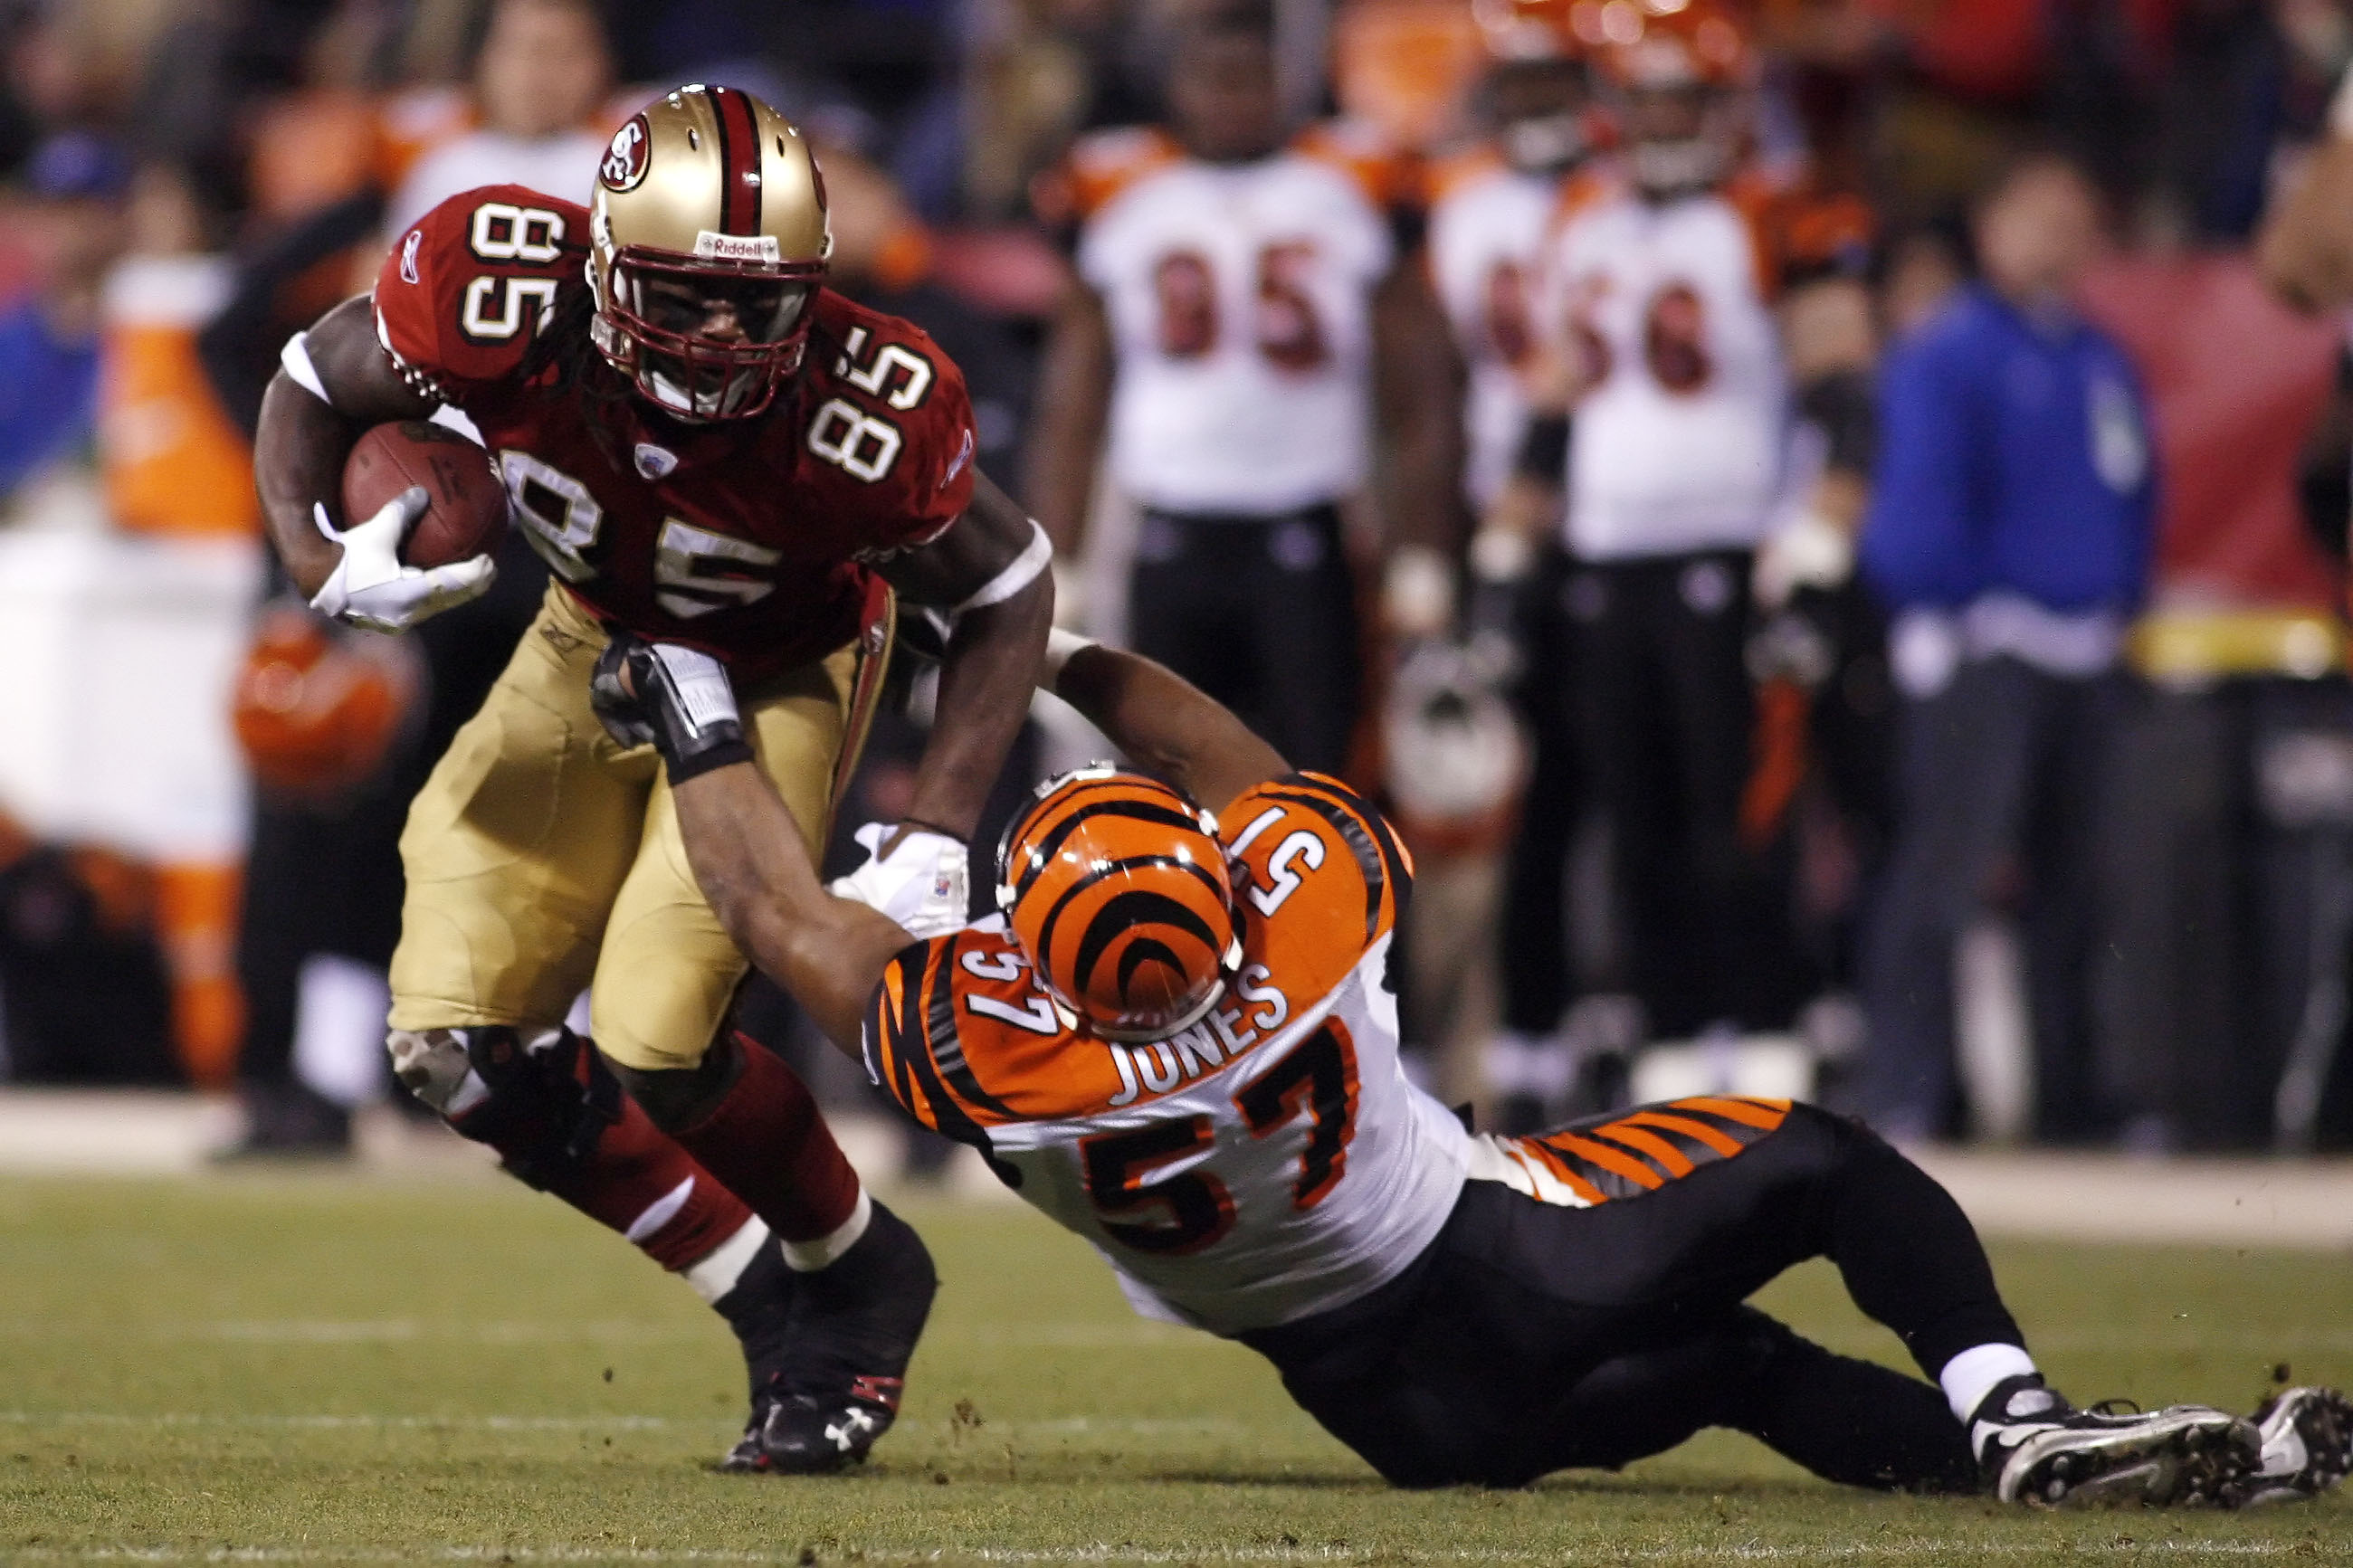 San Francisco 49ers tight end Vernon Davis being tackled in a game against the Cincinnati Bengals. 